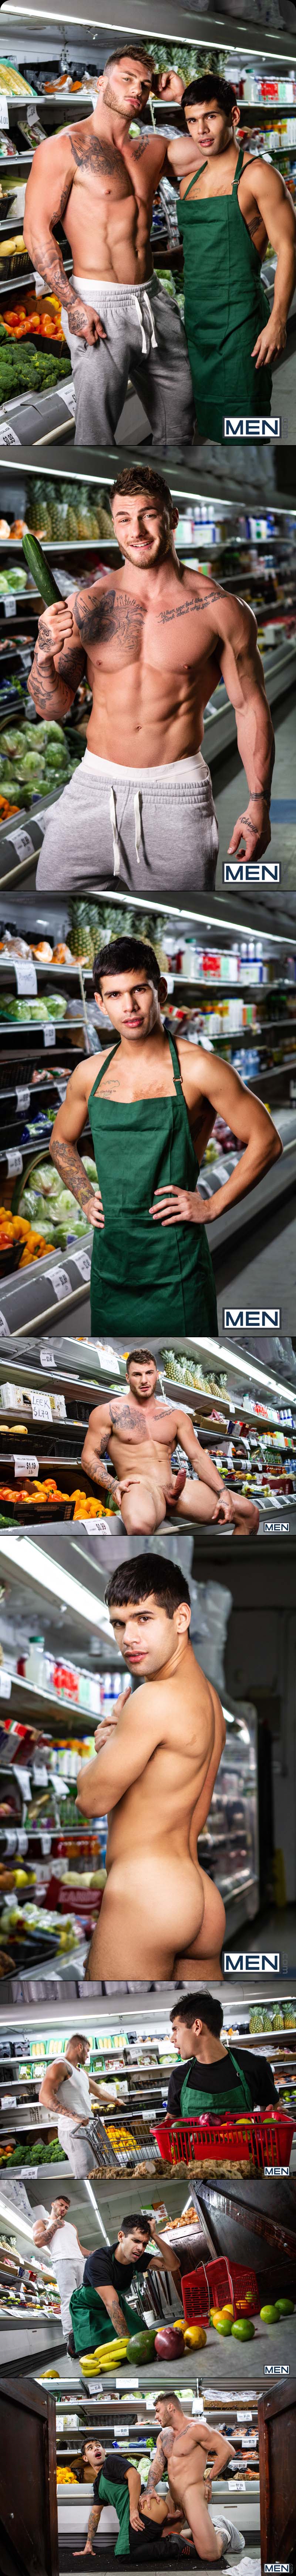 Clean-Up On Aisle 69 (William Seed Fucks Ty Mitchell) at MEN.com.